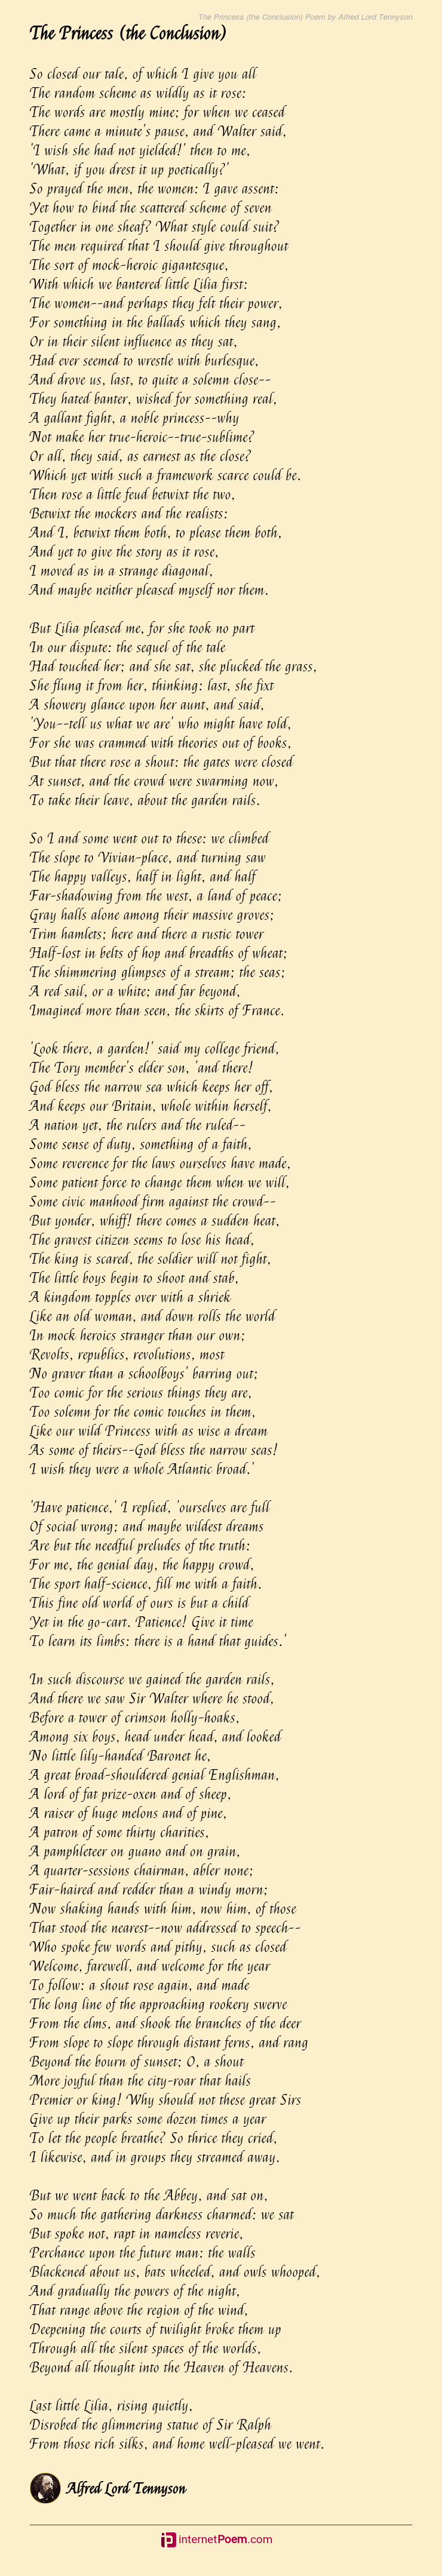 The Princess (the Conclusion) Poem by Alfred Lord Tennyson